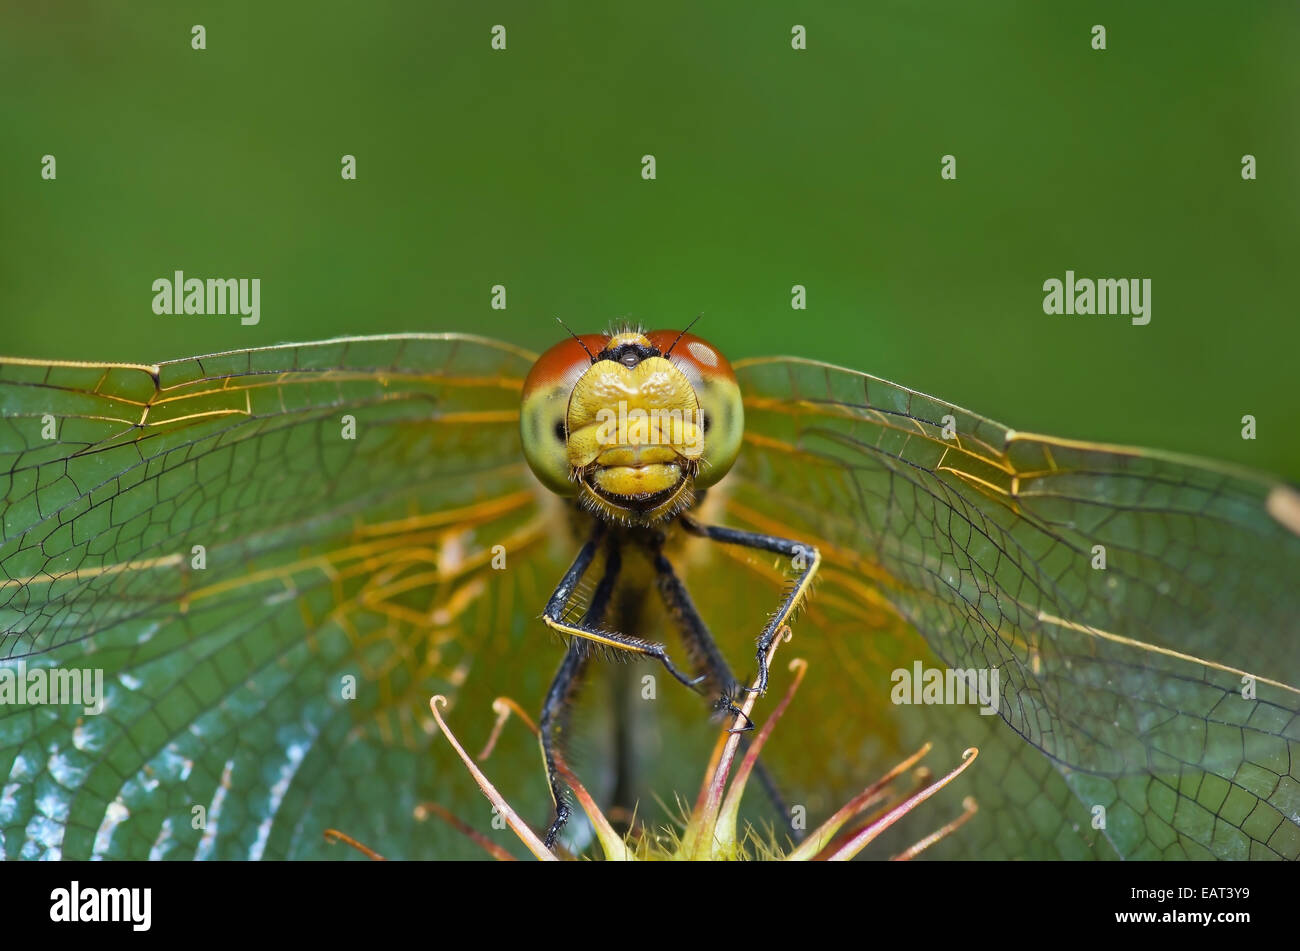 Funny dragonfly sitting on herb on green background Stock Photo